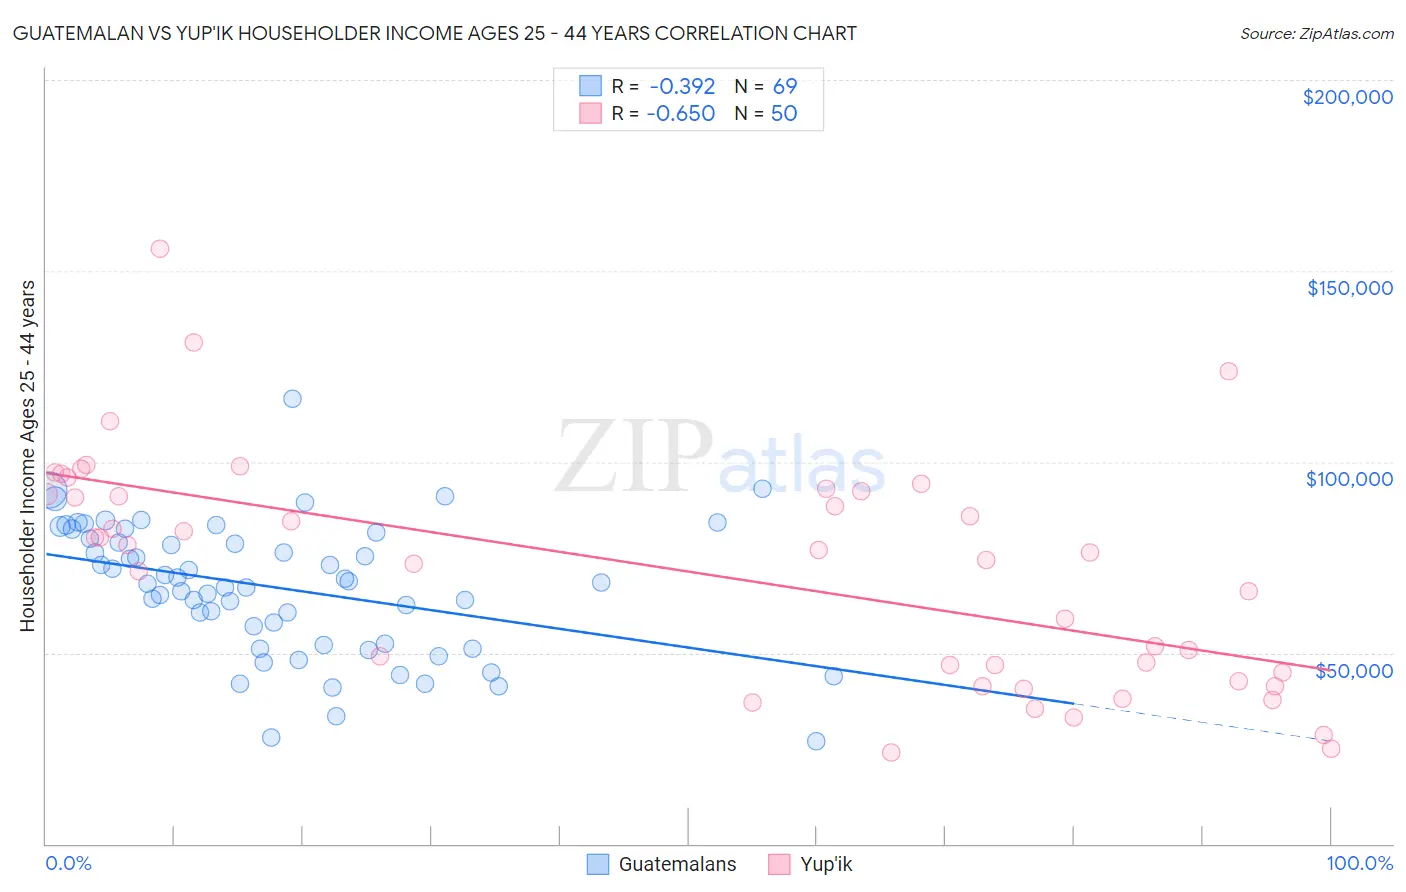 Guatemalan vs Yup'ik Householder Income Ages 25 - 44 years